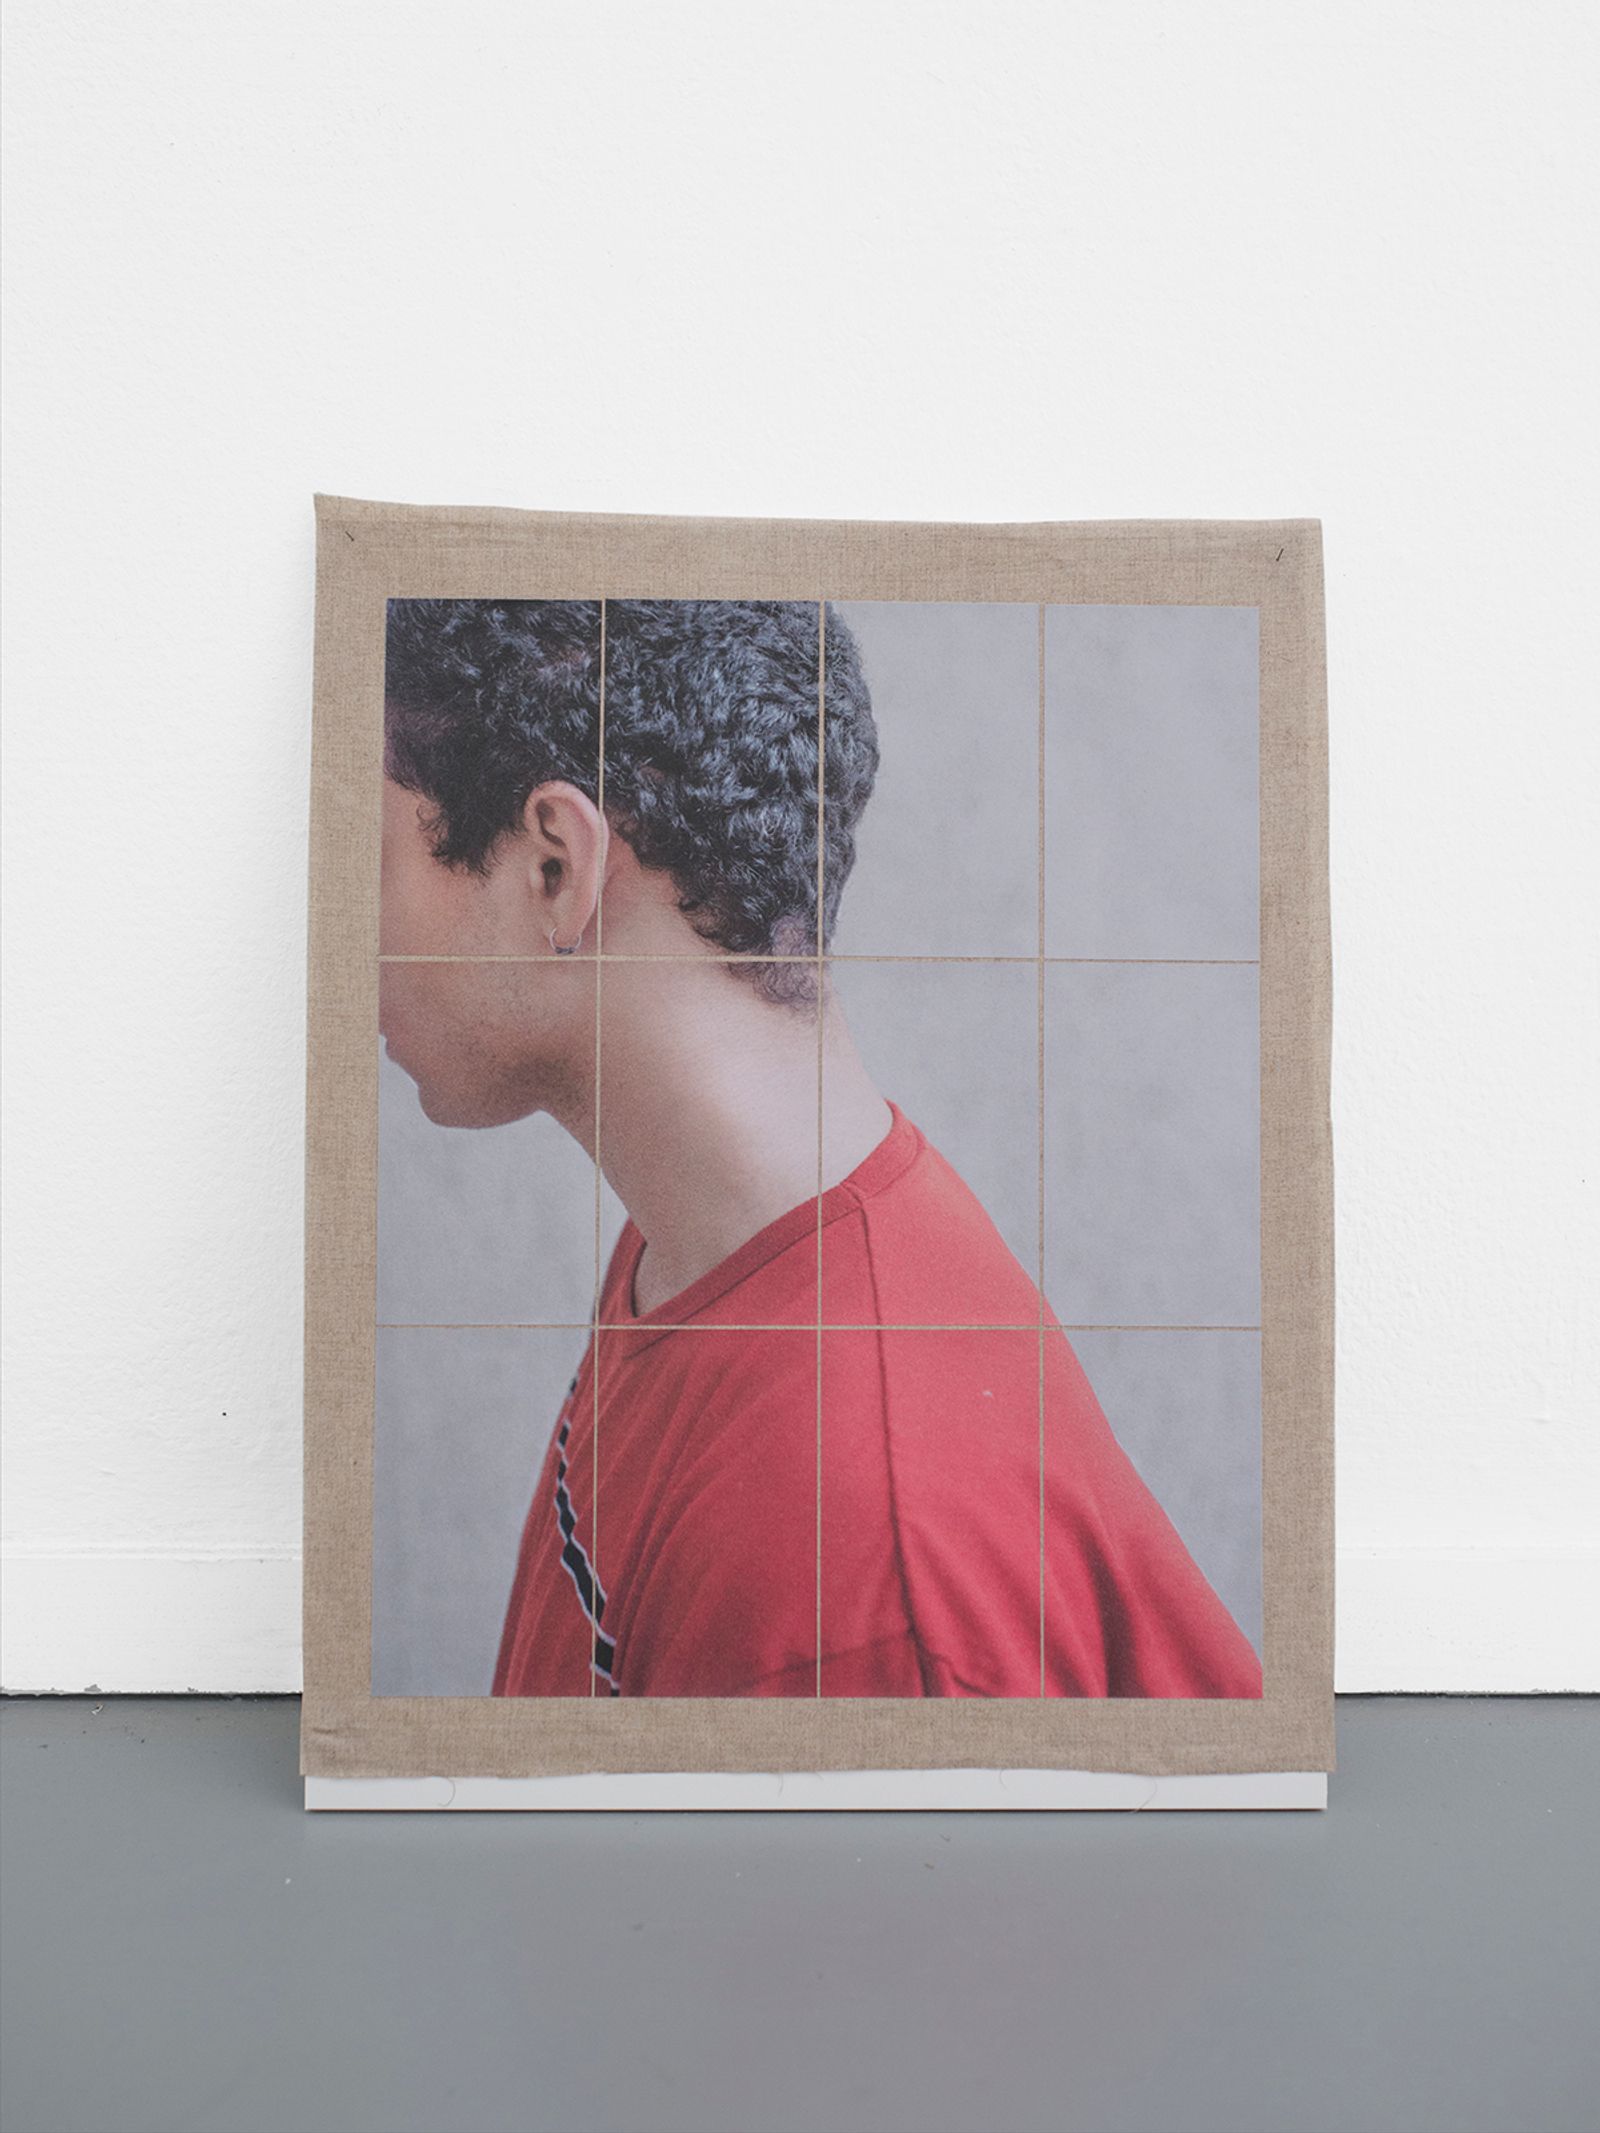 © Esther Hovers - Structures, Ibrahim, 2019 58 x 46 cm / 22.8 x 18.1 in. Inkjet prints on Tosa Shi – 54 gsm, fixed on linen.